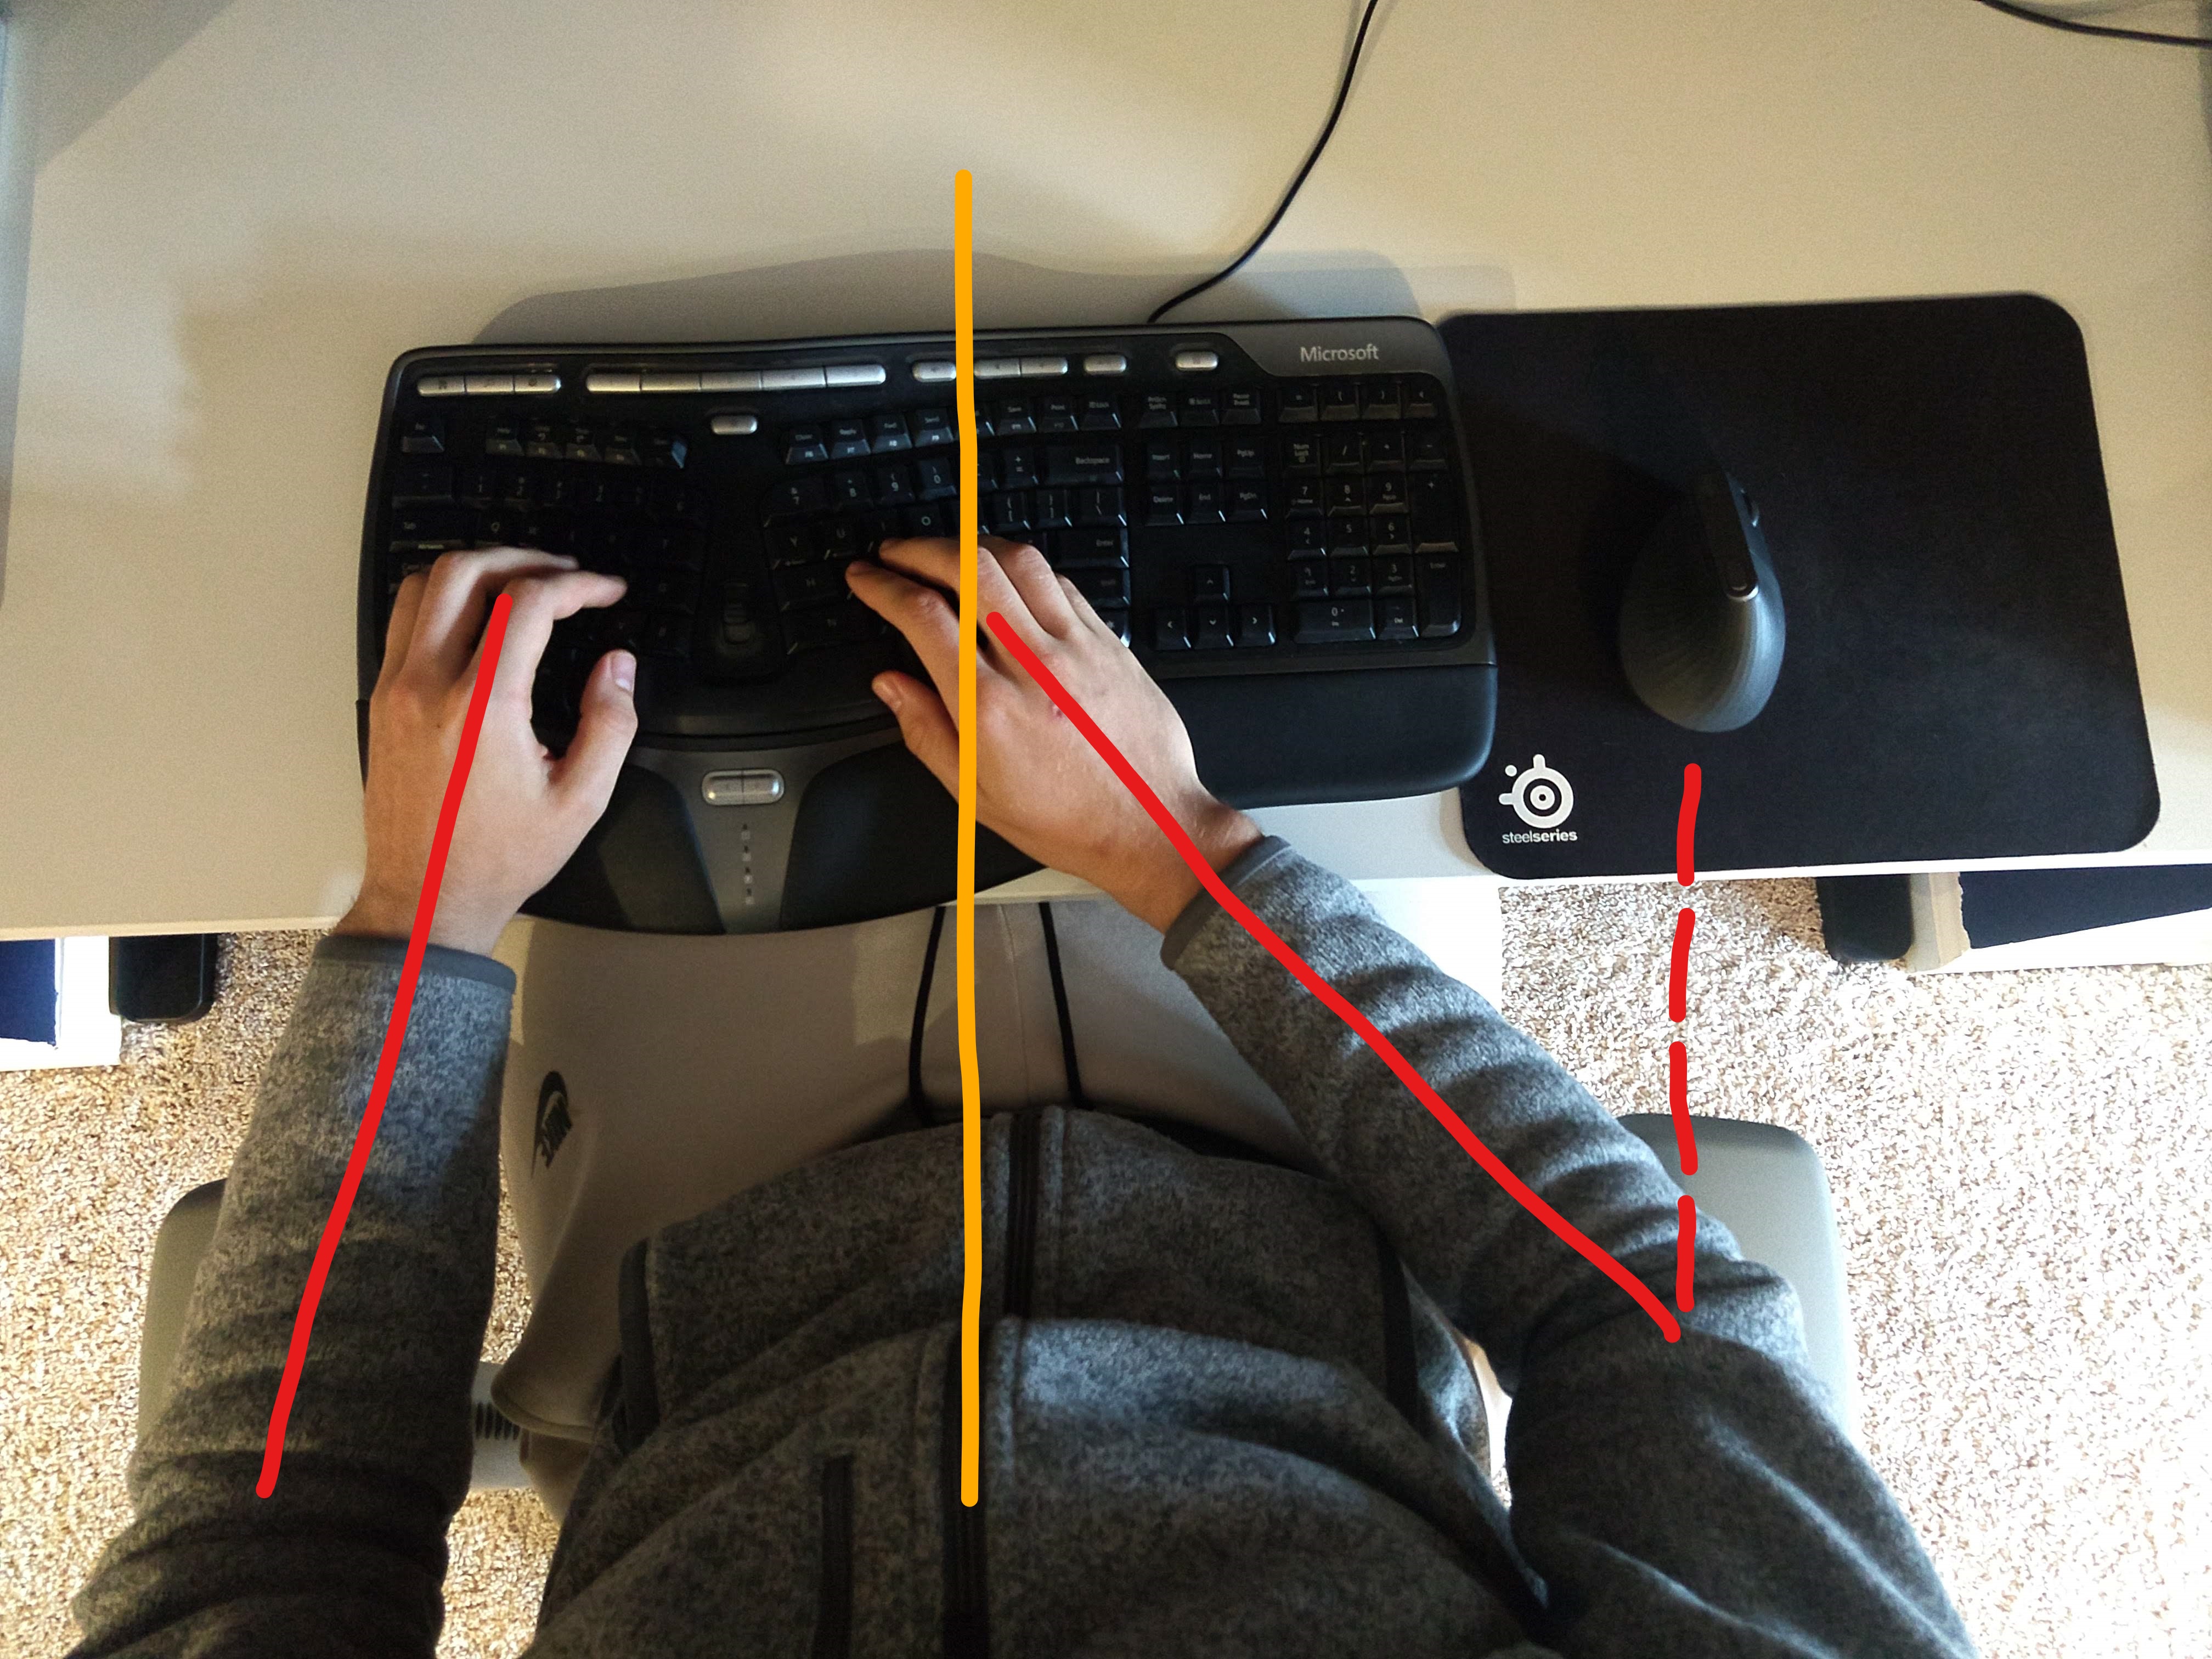 Overhead photo of my arm alignment while typing on the keyboard, with lines drawn showing how asymmetric my arm position is relative to the midline, and how far I have to swing my arm to reach the mouse.